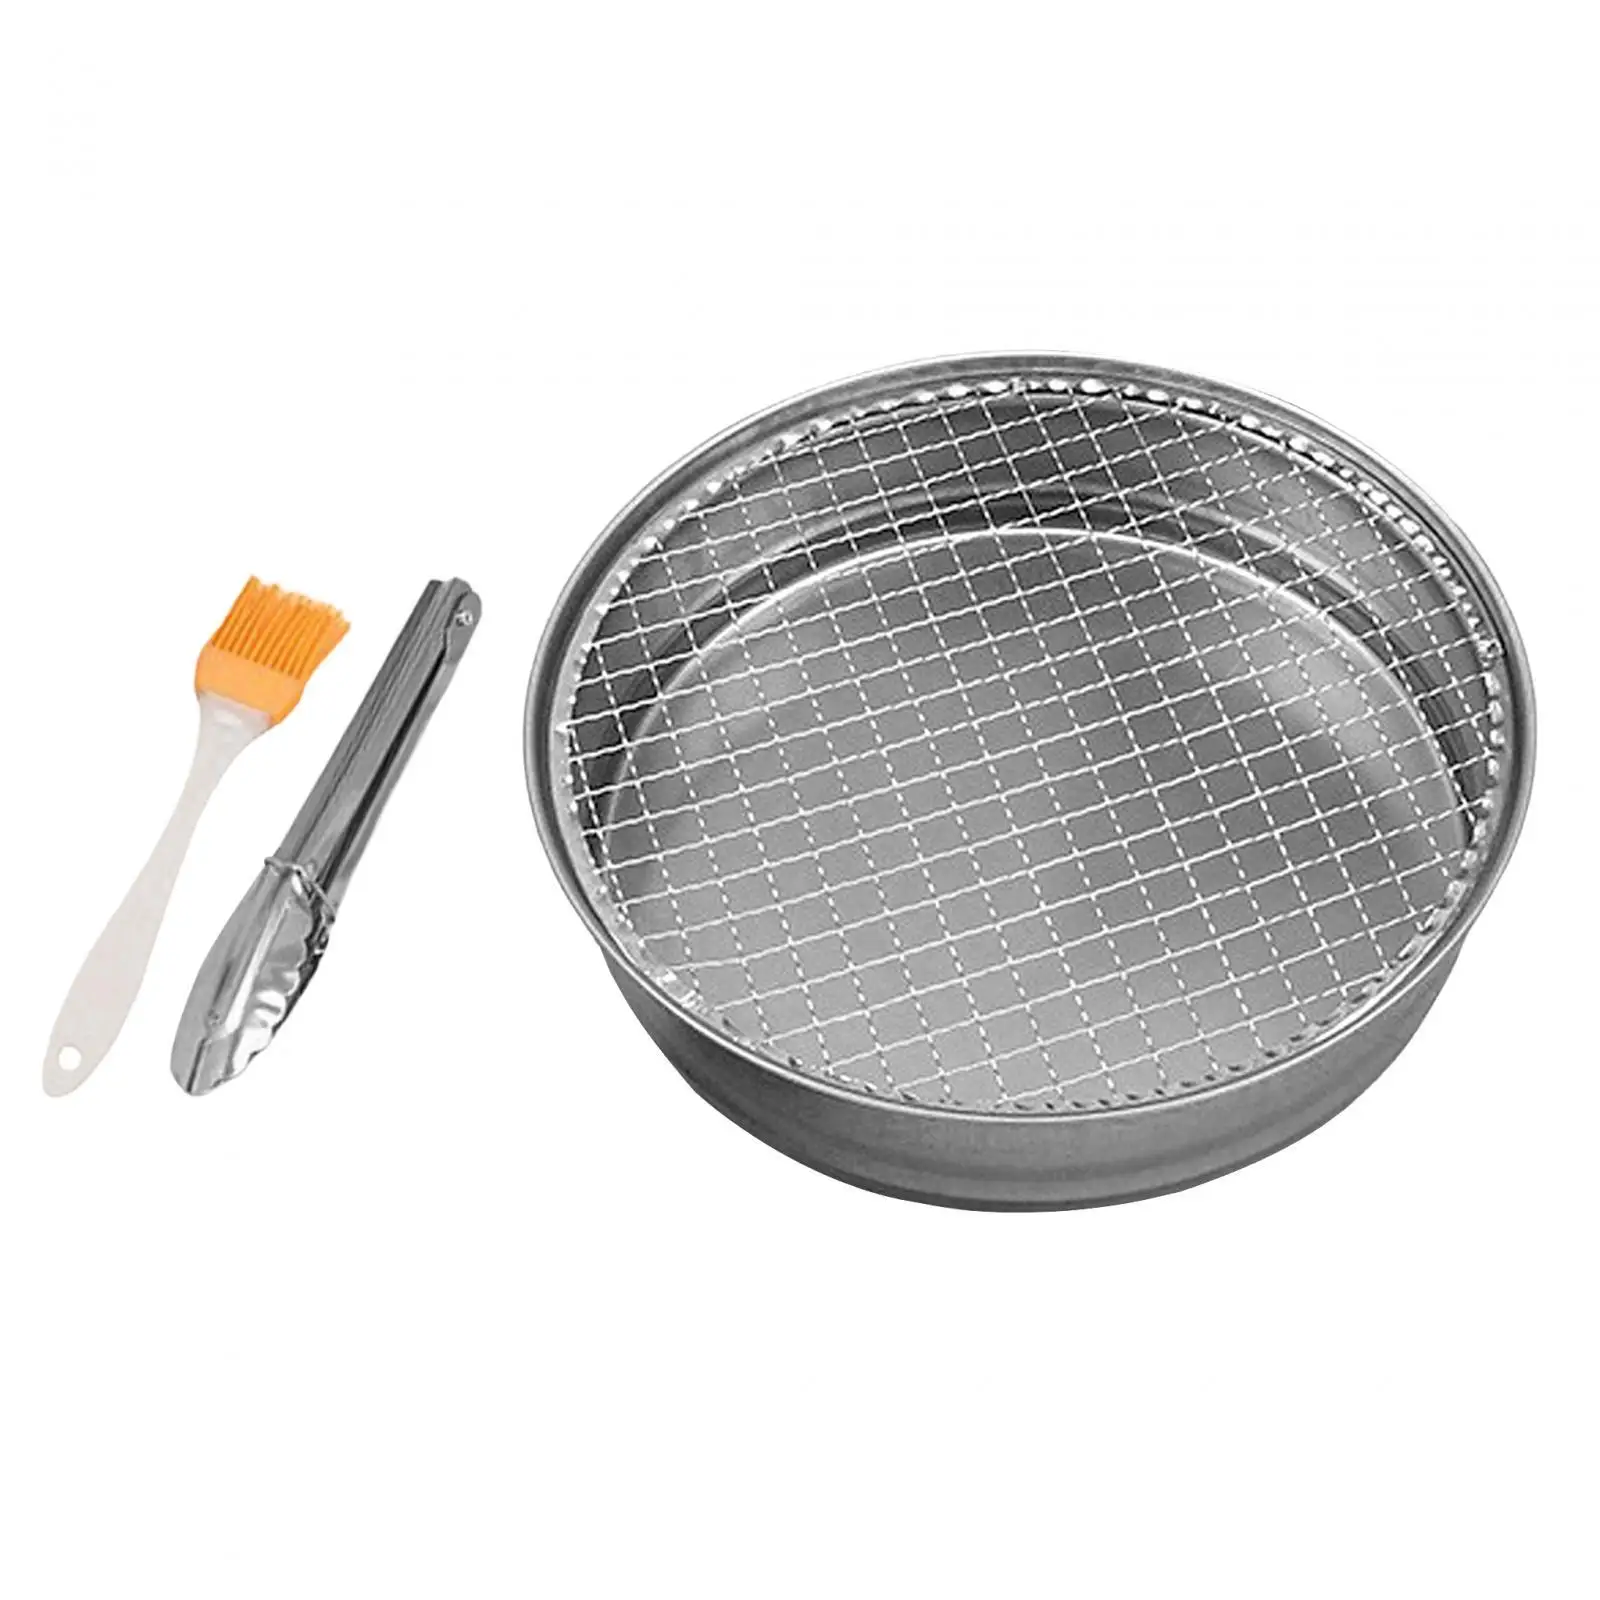 Disposable Charcoal Grill Portable Stainless Steel Baking Tray with Brush and Tongs for Cooking Patio Backpacking Hiking